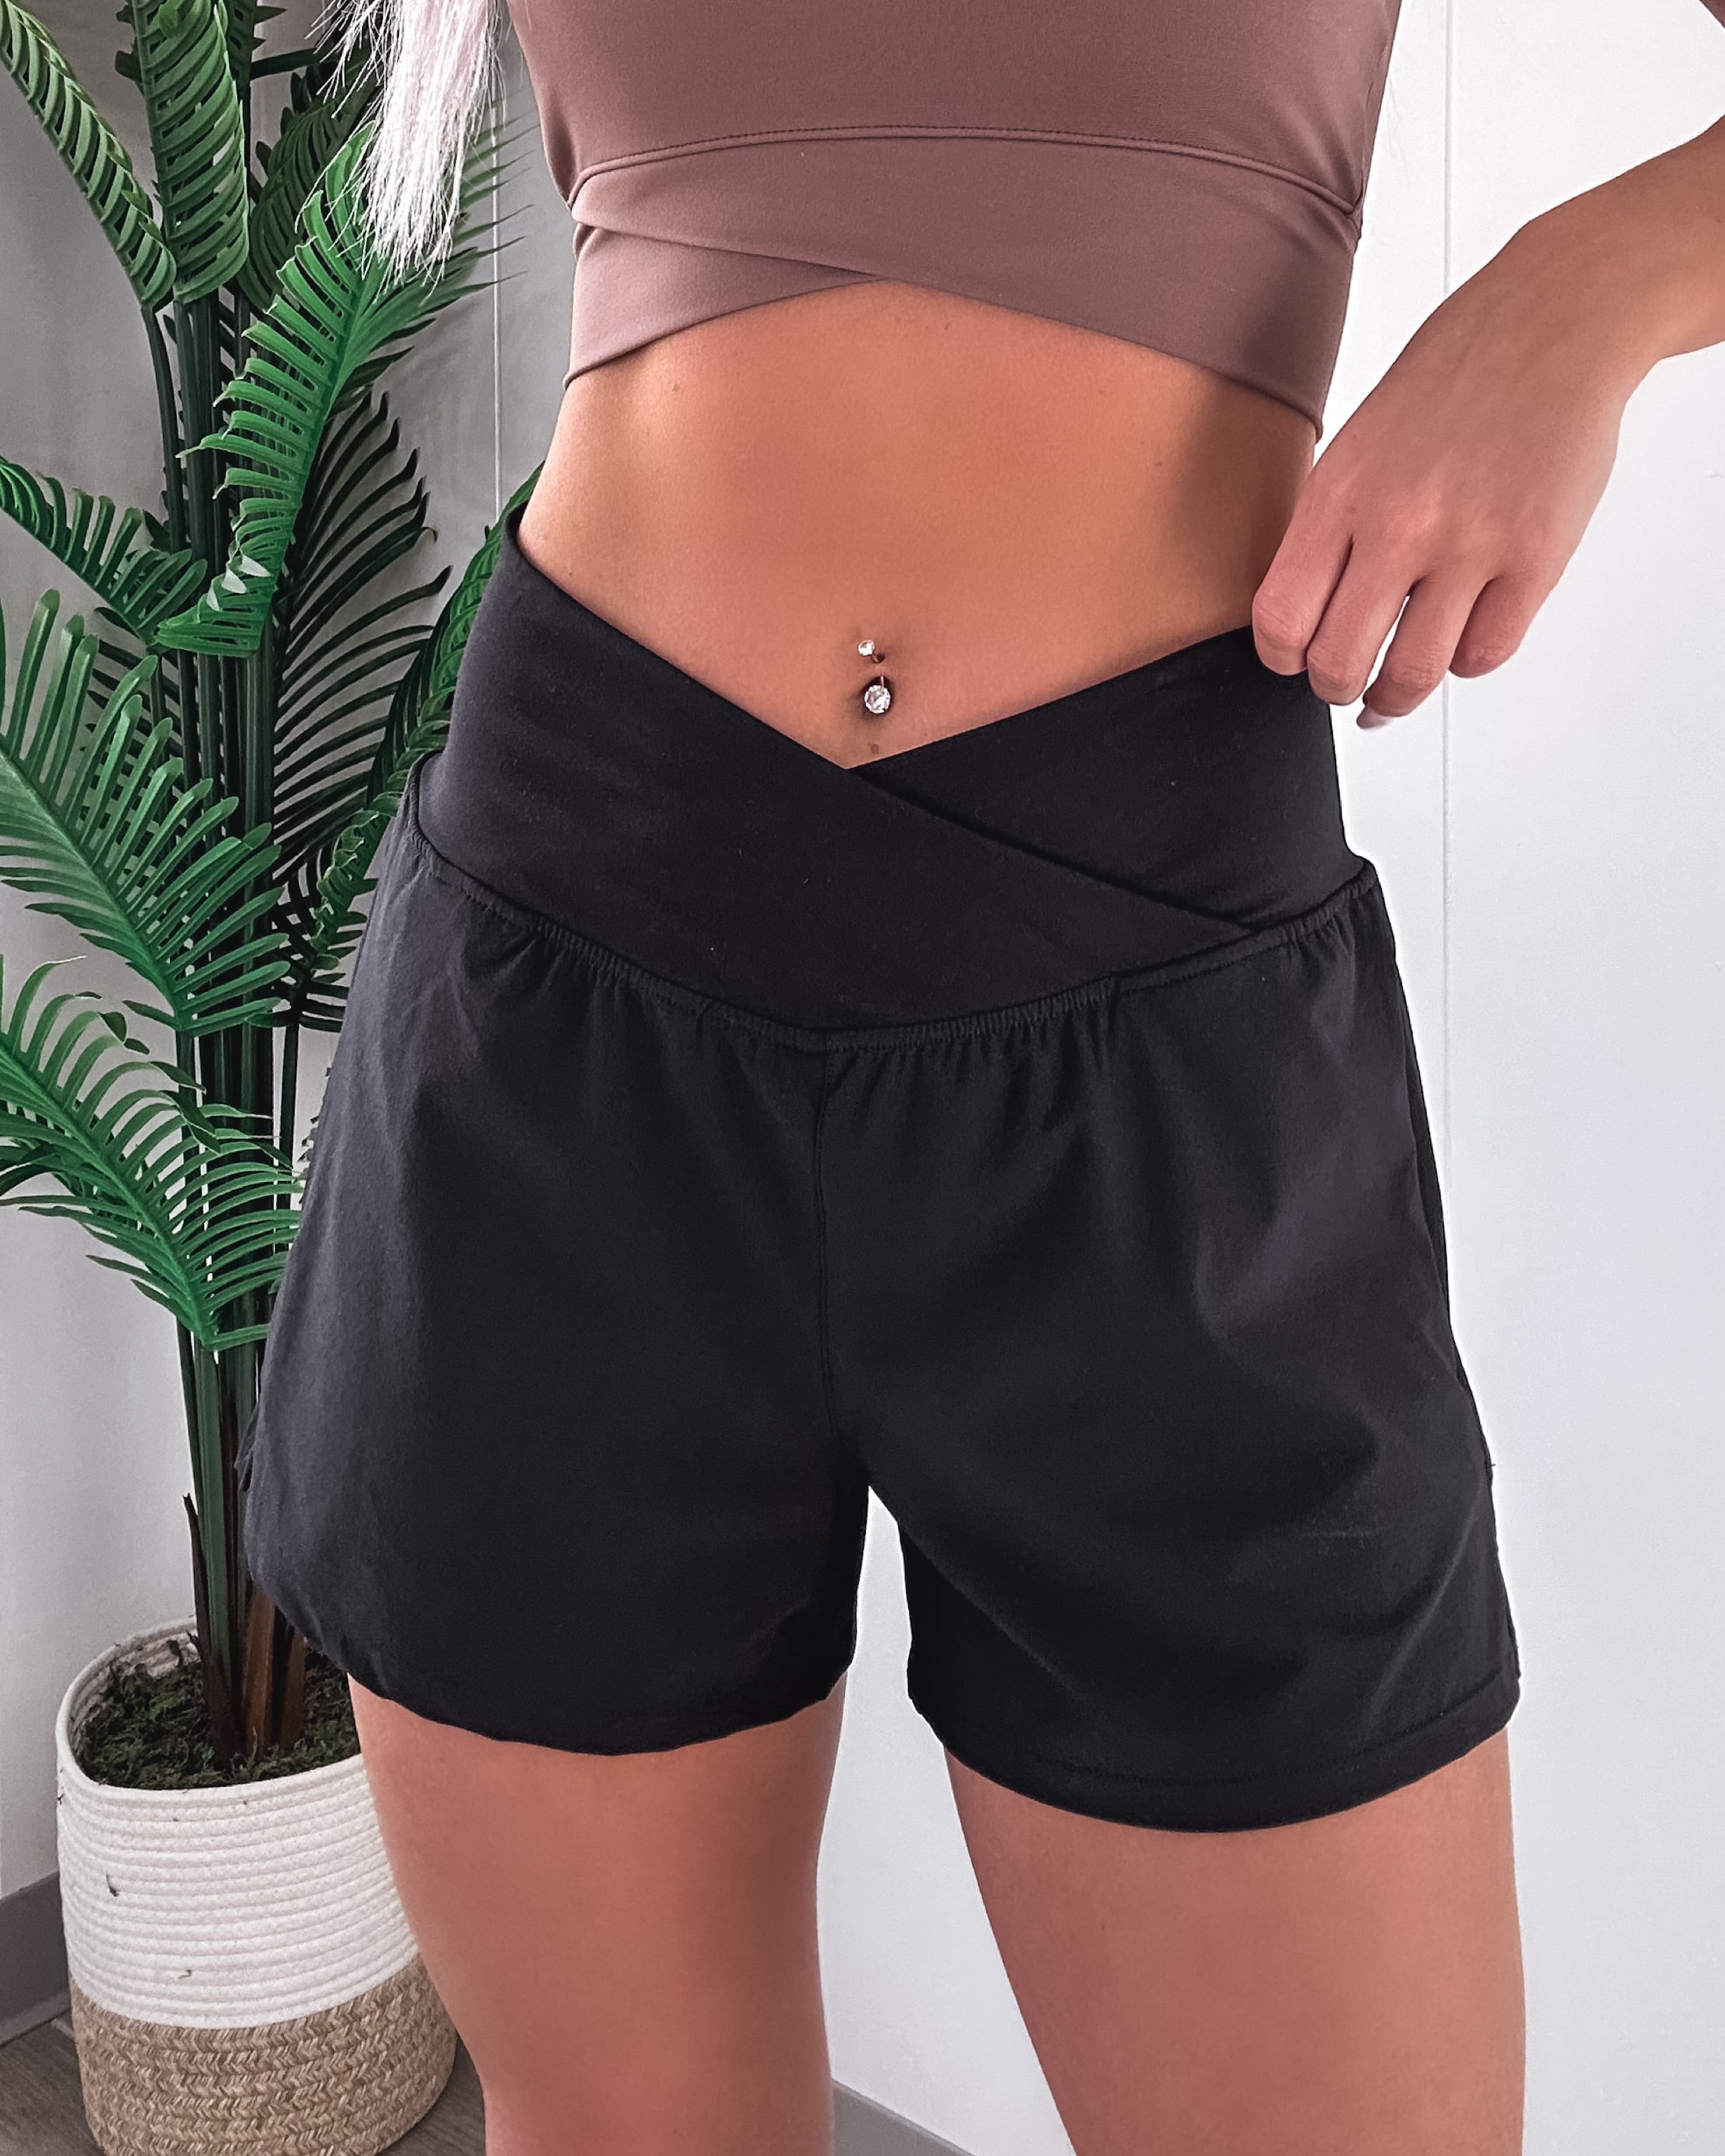 Count Me In Crossover Shorts - Black